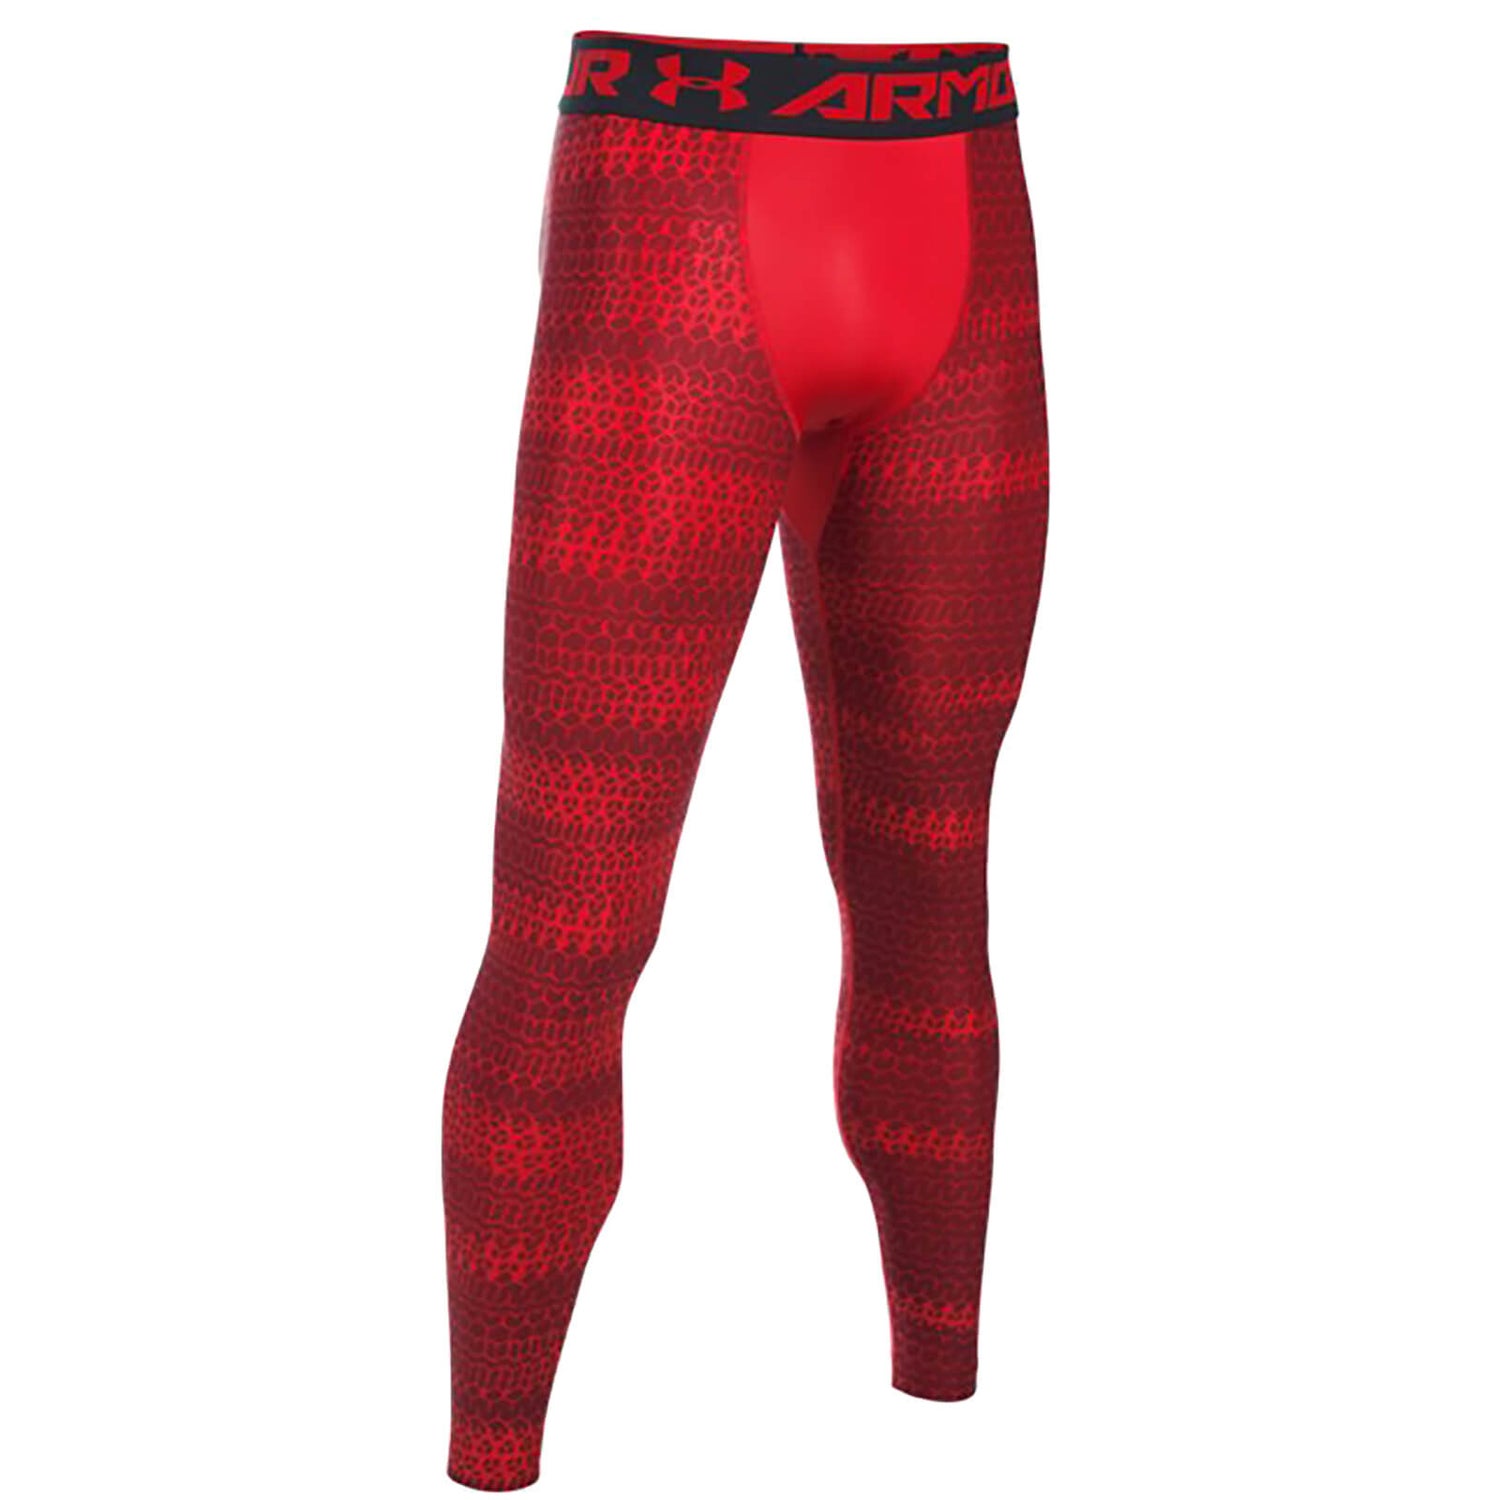 Under Armour Men's HeatGear Armour Printed Compression Tights